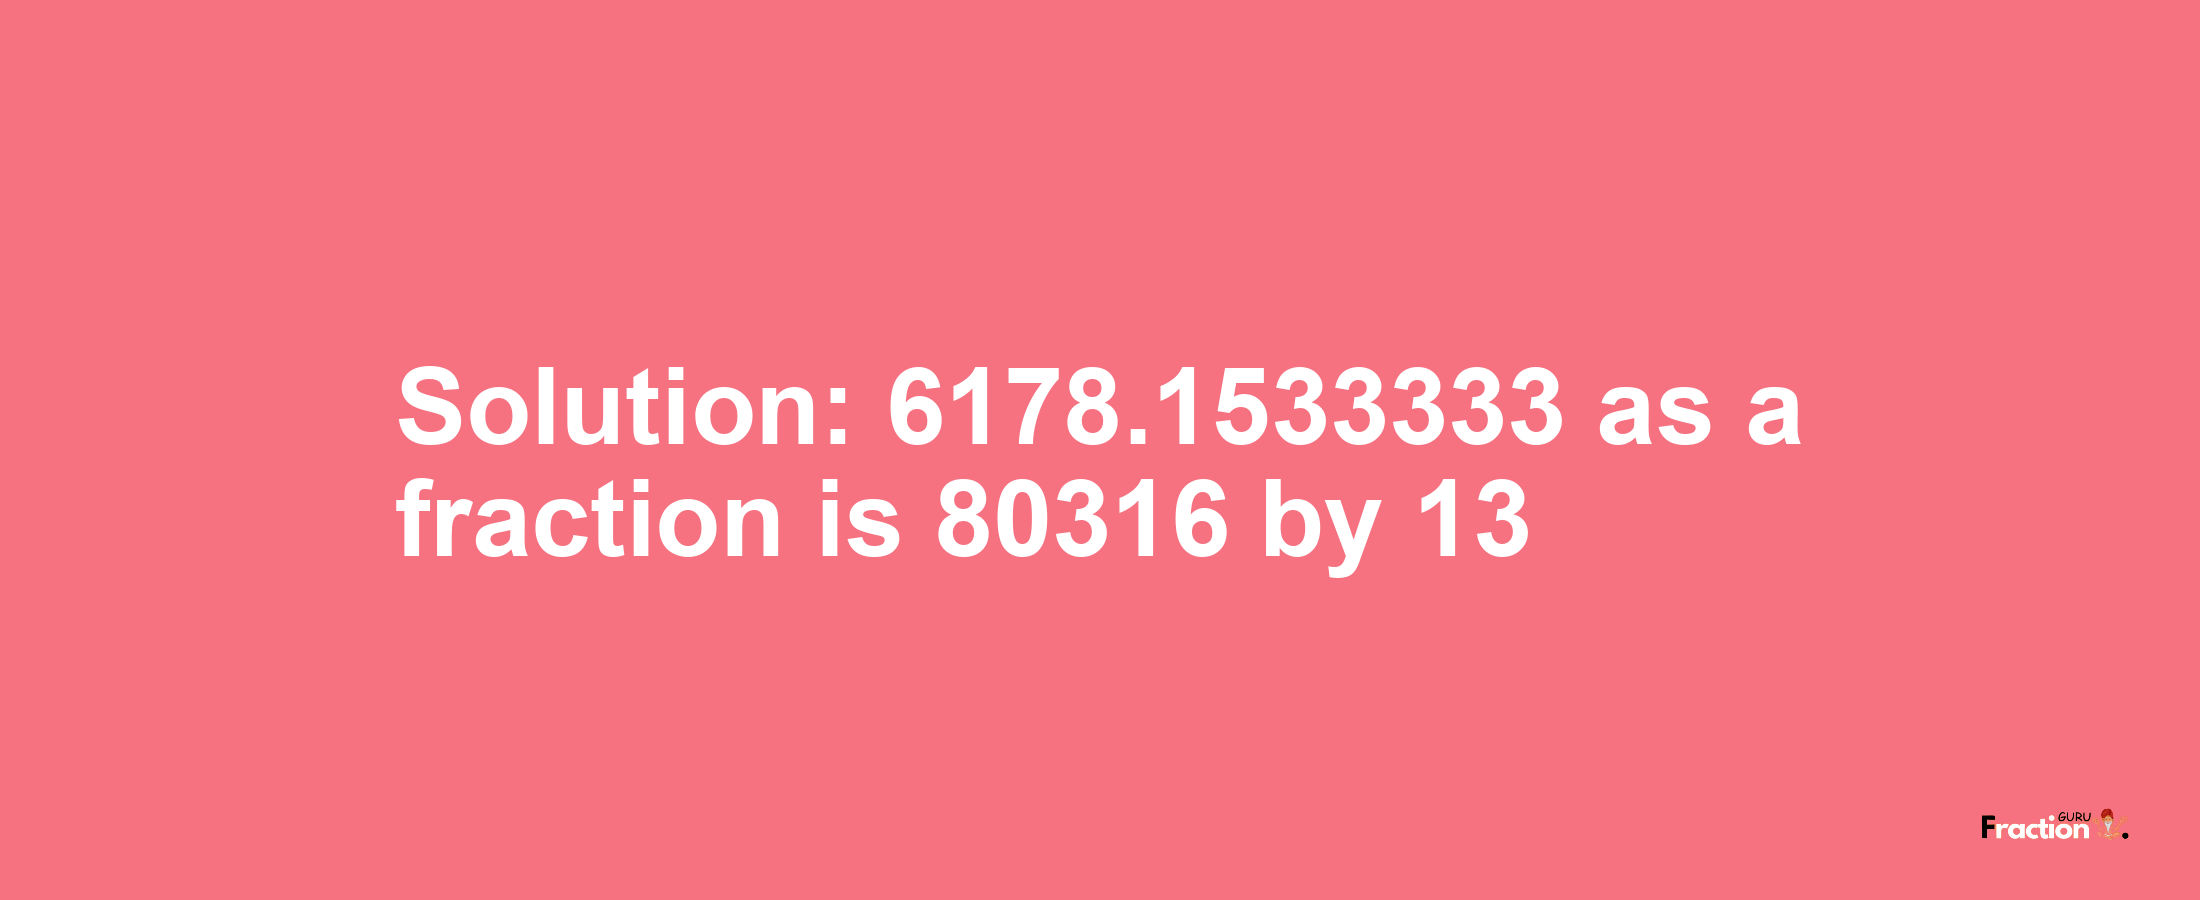 Solution:6178.1533333 as a fraction is 80316/13